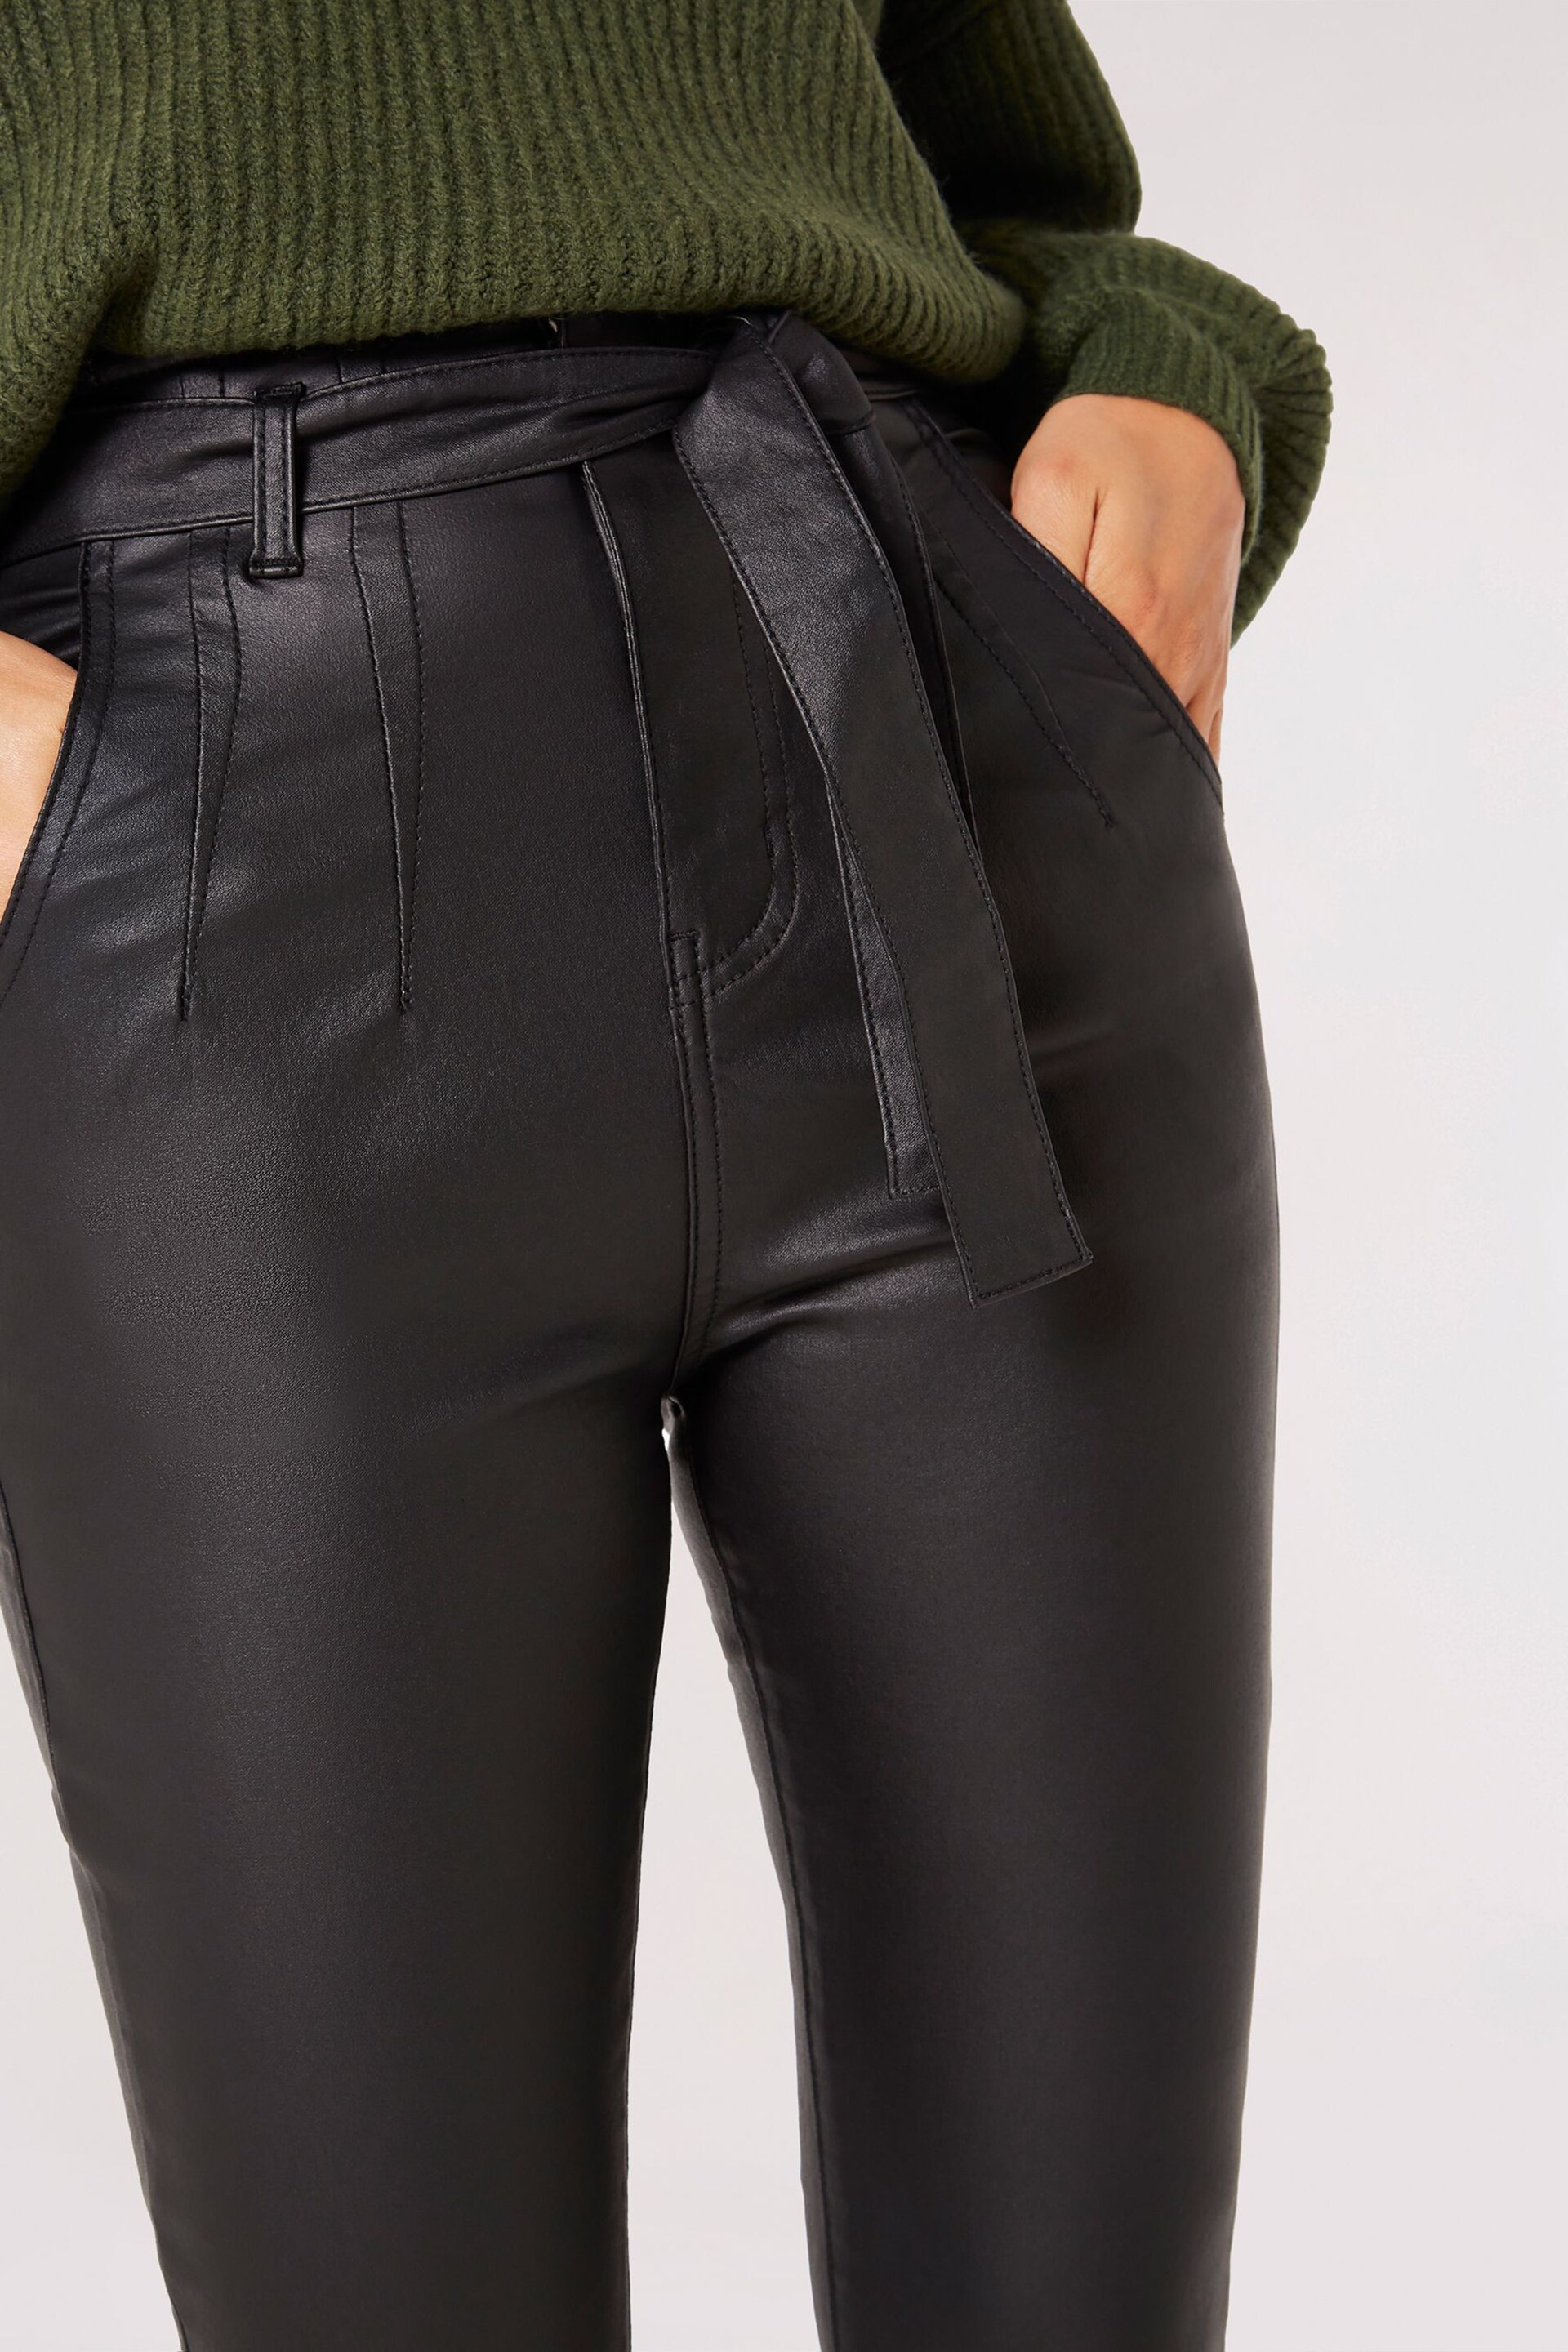 Apricot Black Leather Look Belted Trousers - Image 4 of 4